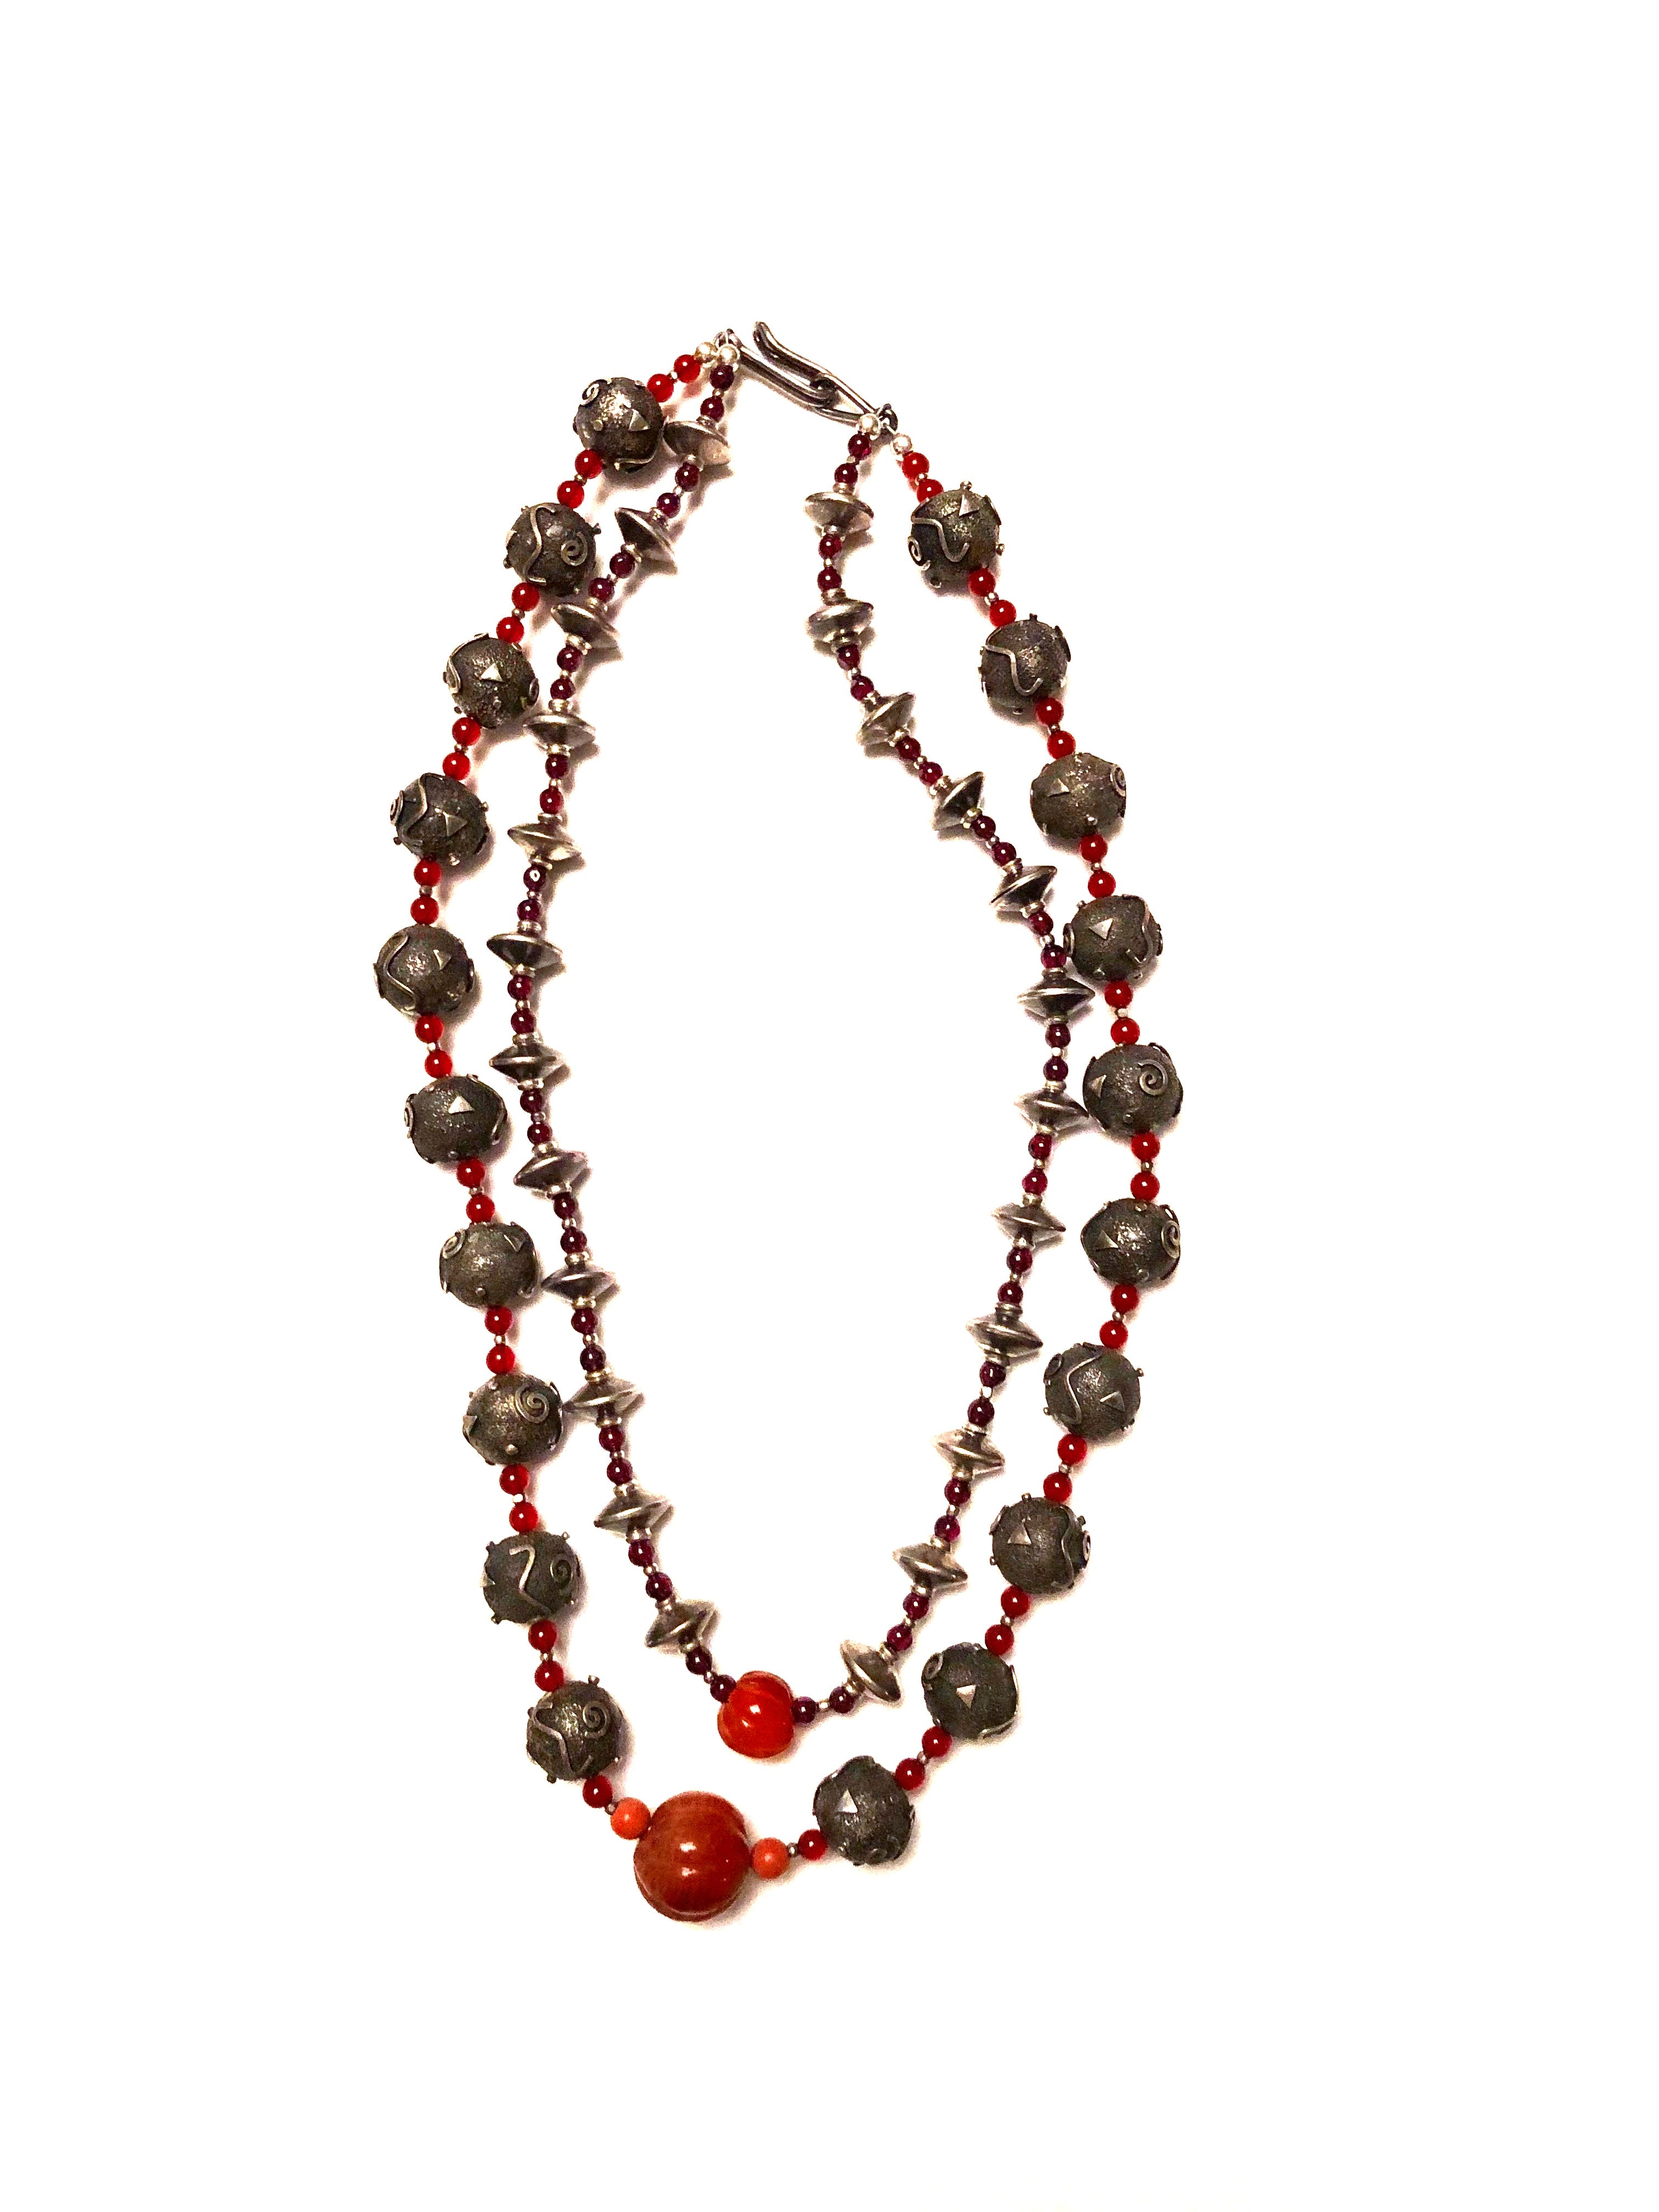 Stering Silver_Carnelian Necklace